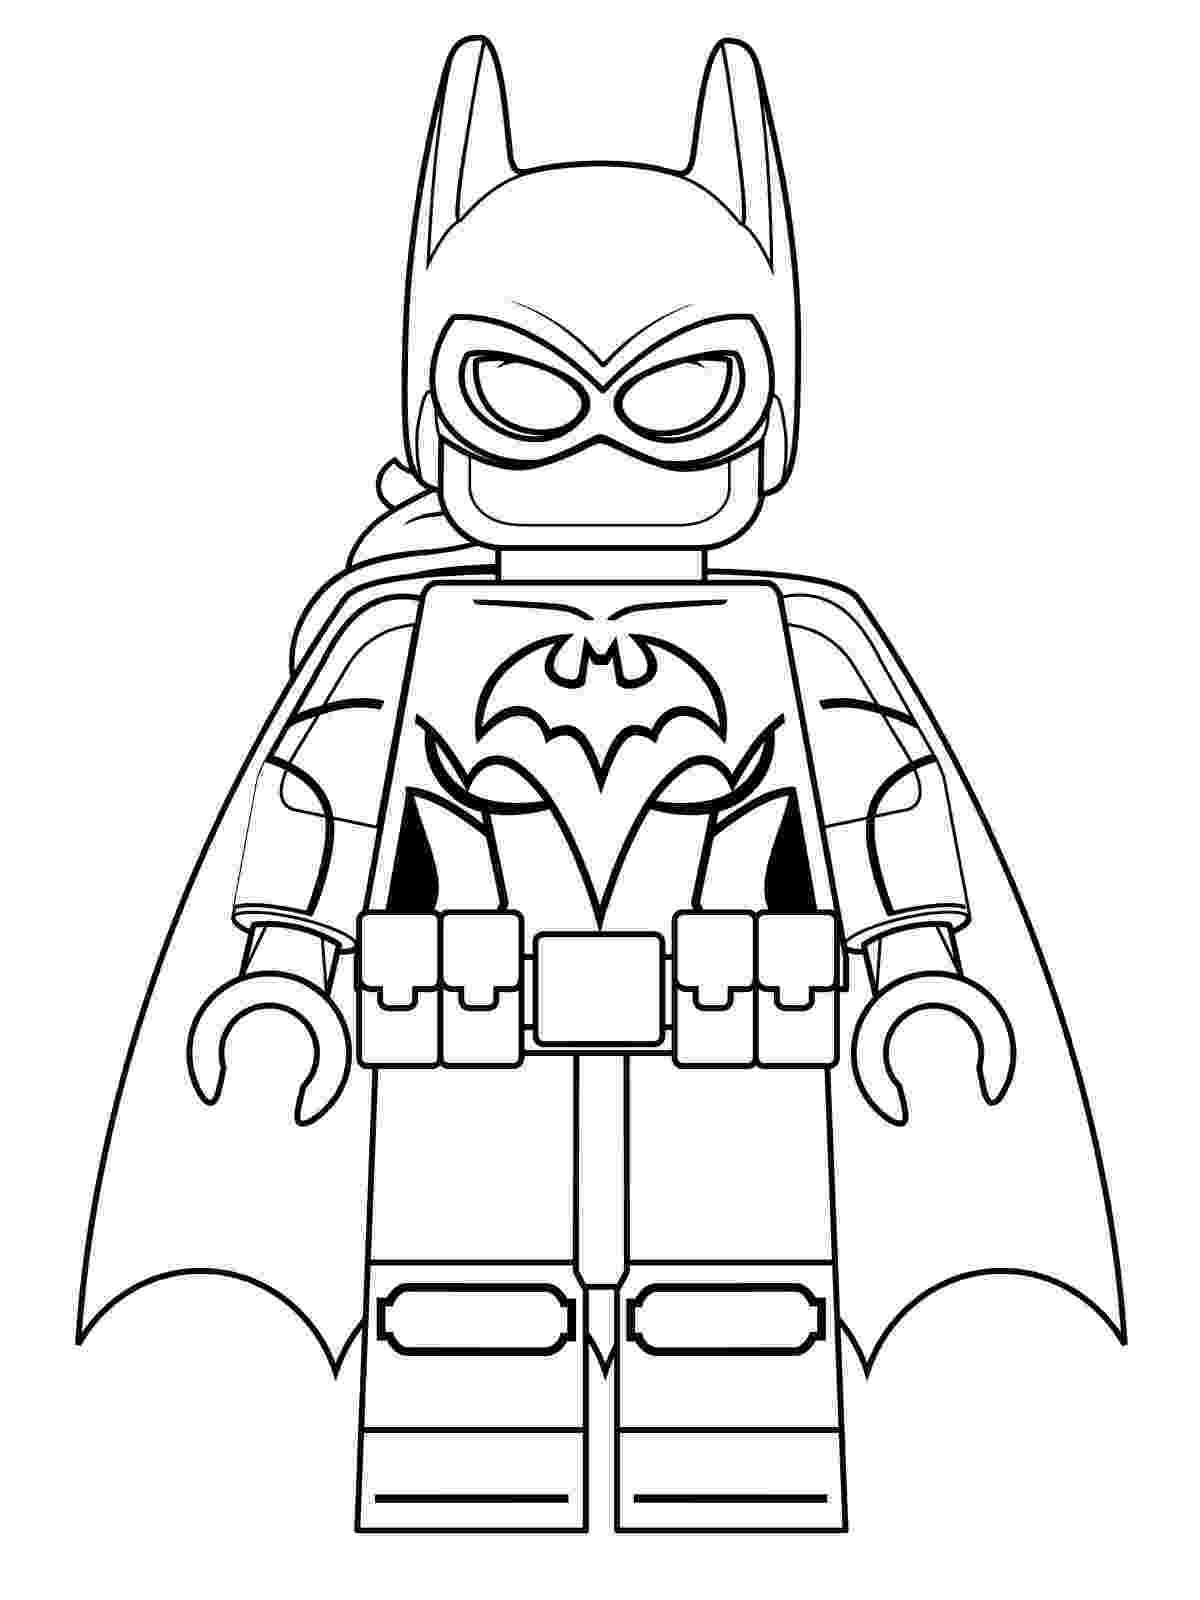 batman coloring pages free printable lego batman coloring pages best coloring pages for kids free pages coloring batman printable 